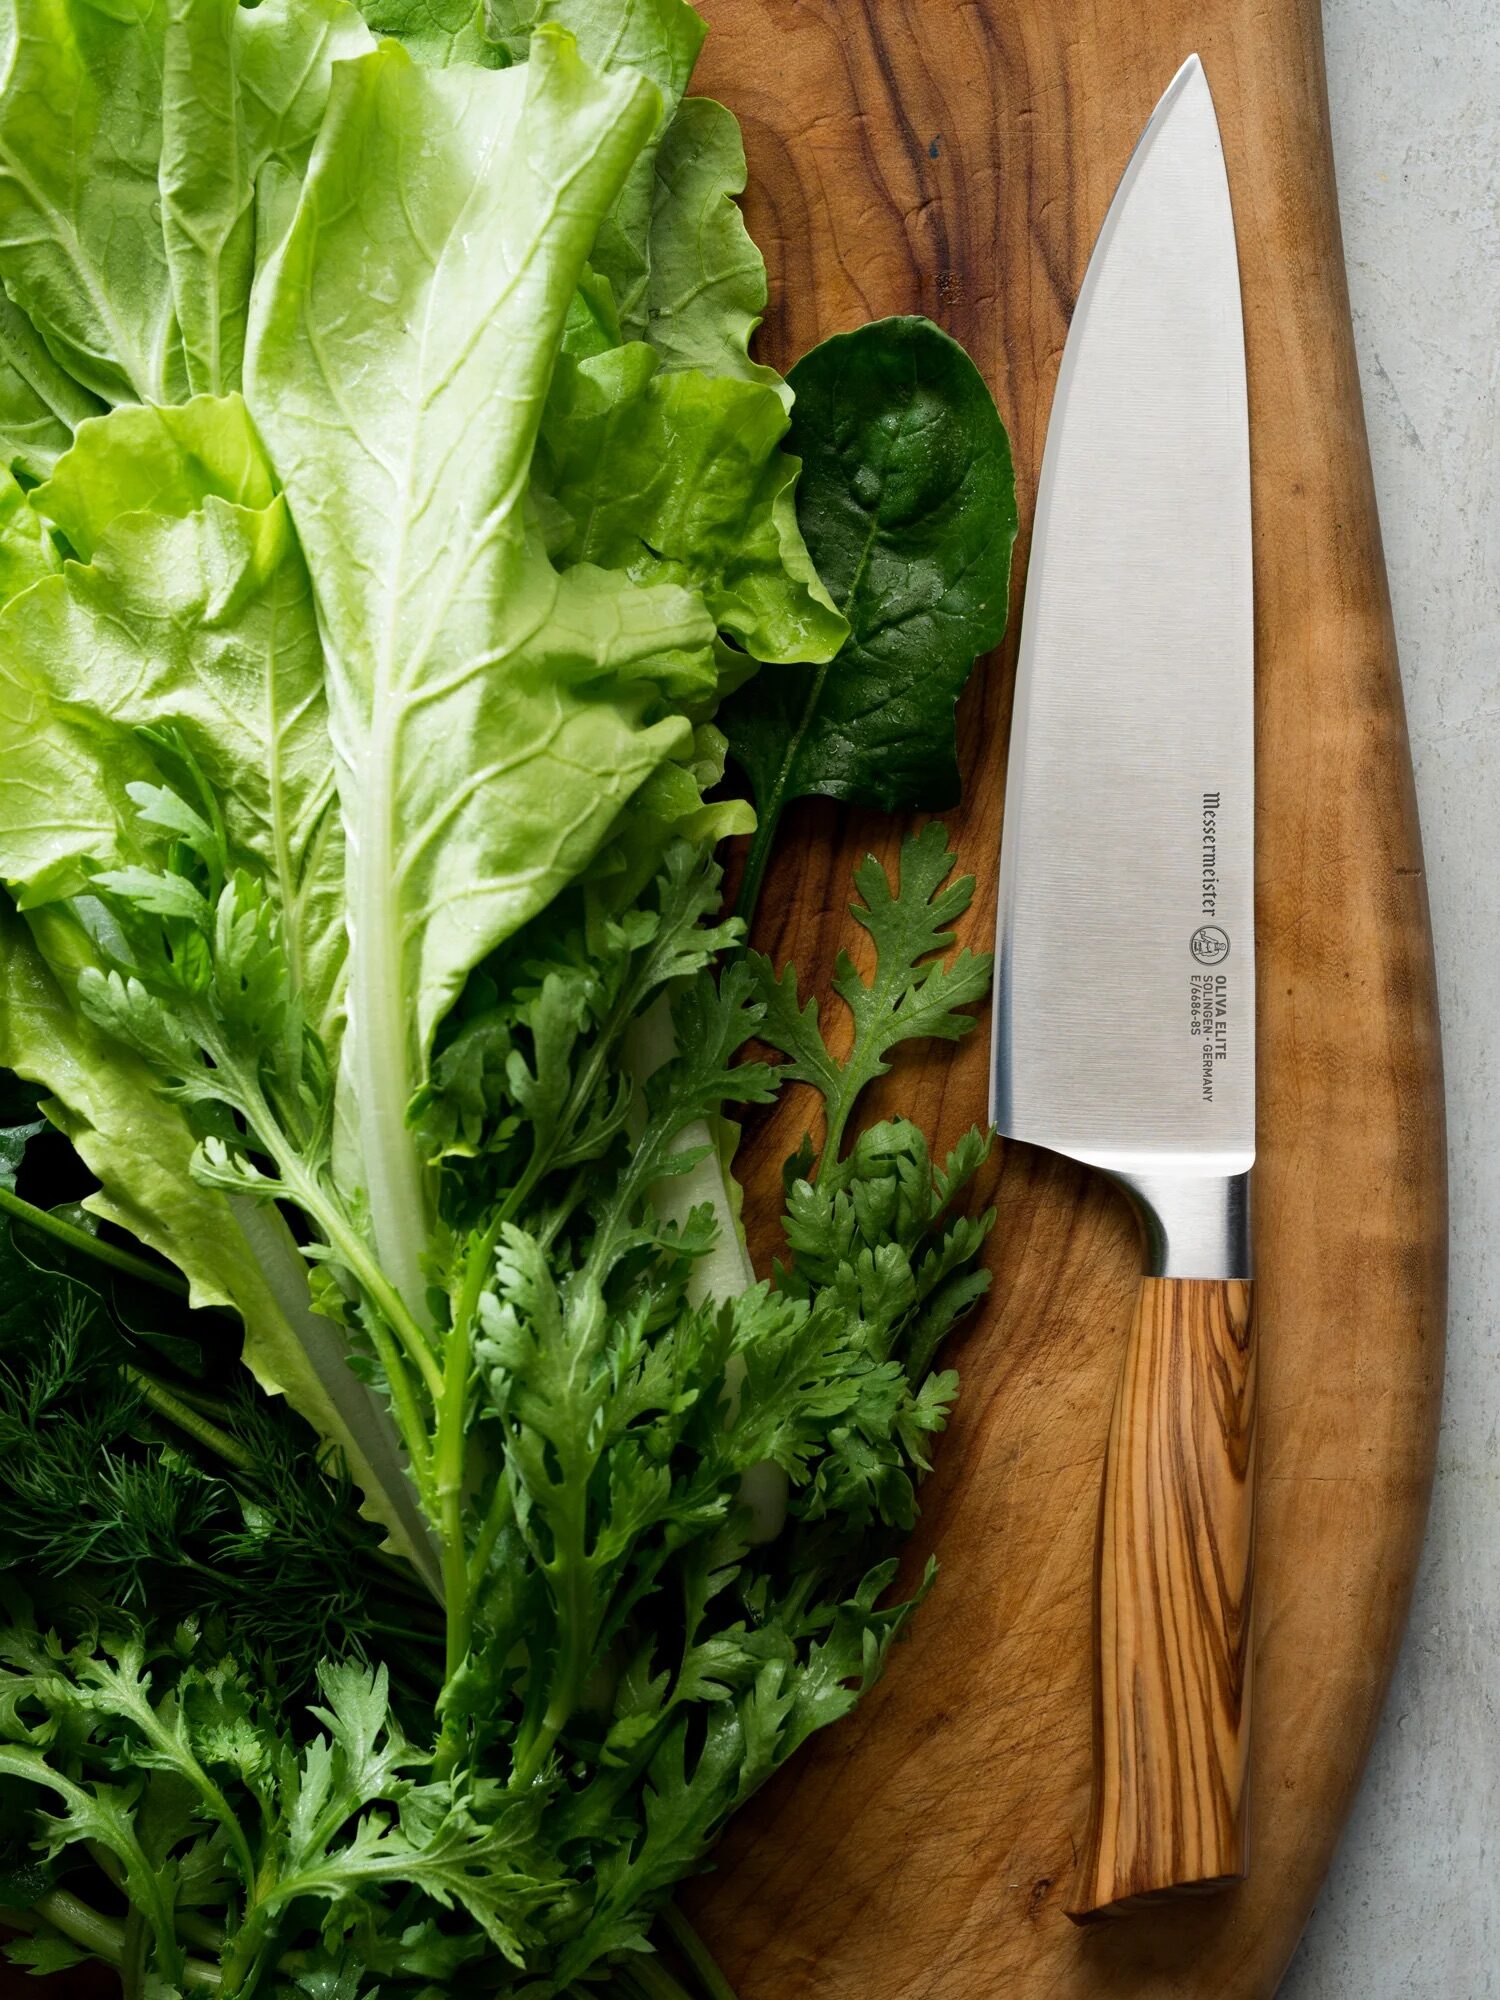 A chef's knife on a wooden cutting board surrounded by fresh green lettuce and herbs.